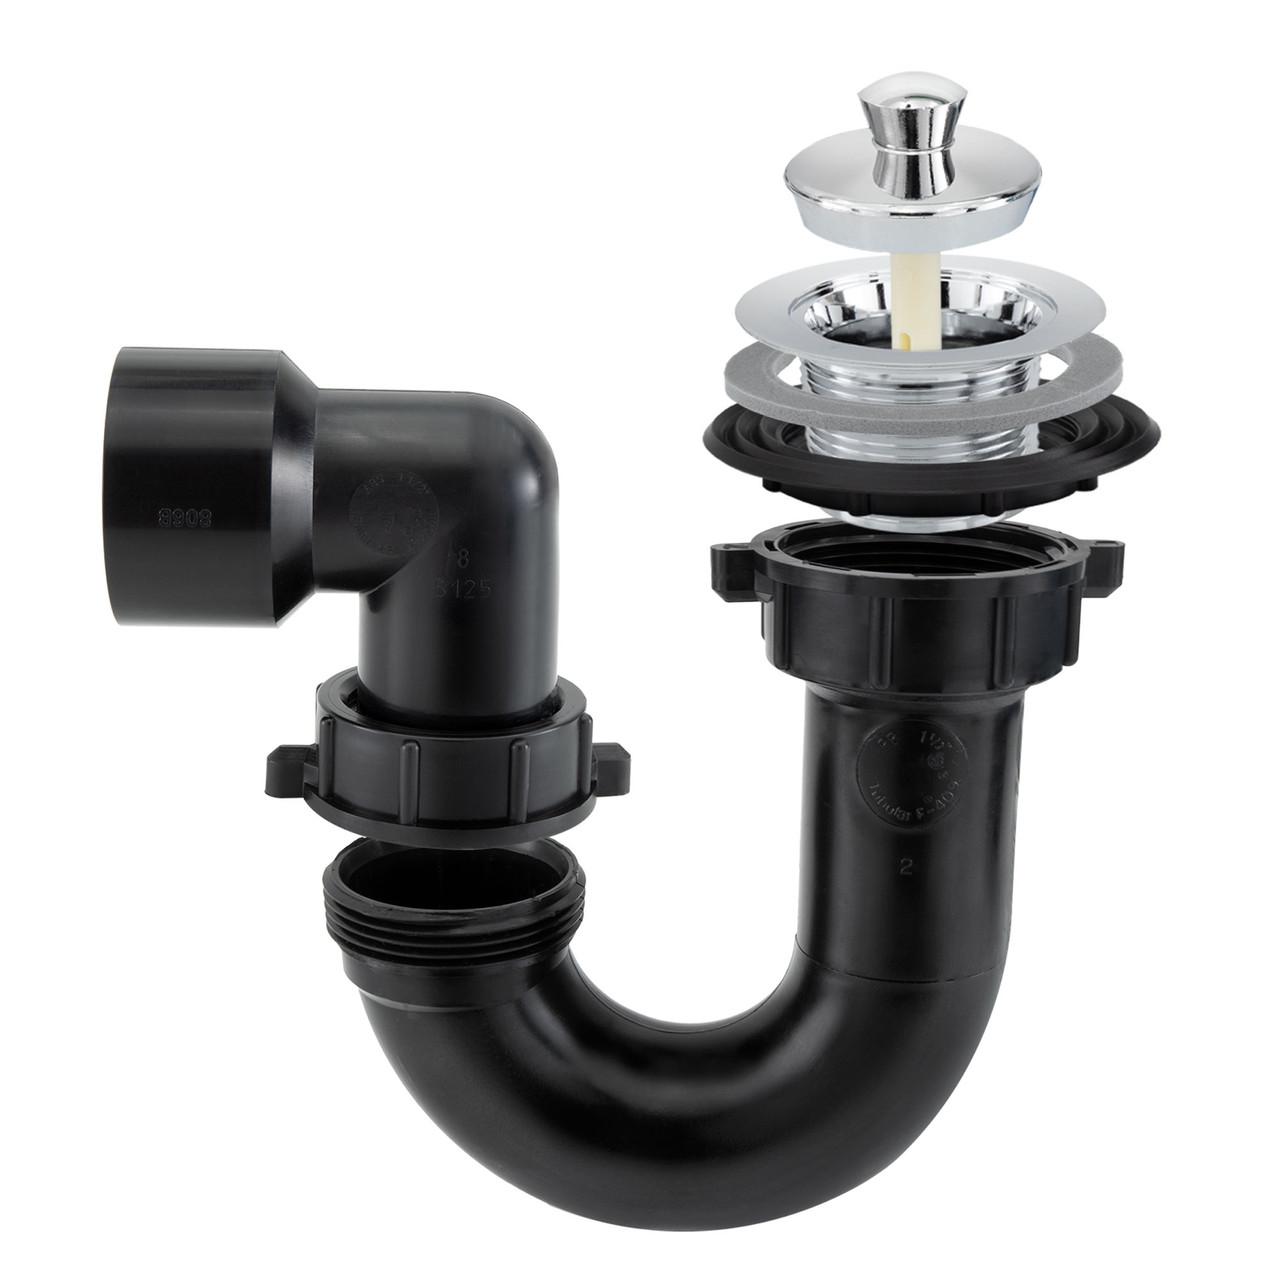 Gutter Extension Pipe Drain Air Conditioner Accessories Sink Outdoor